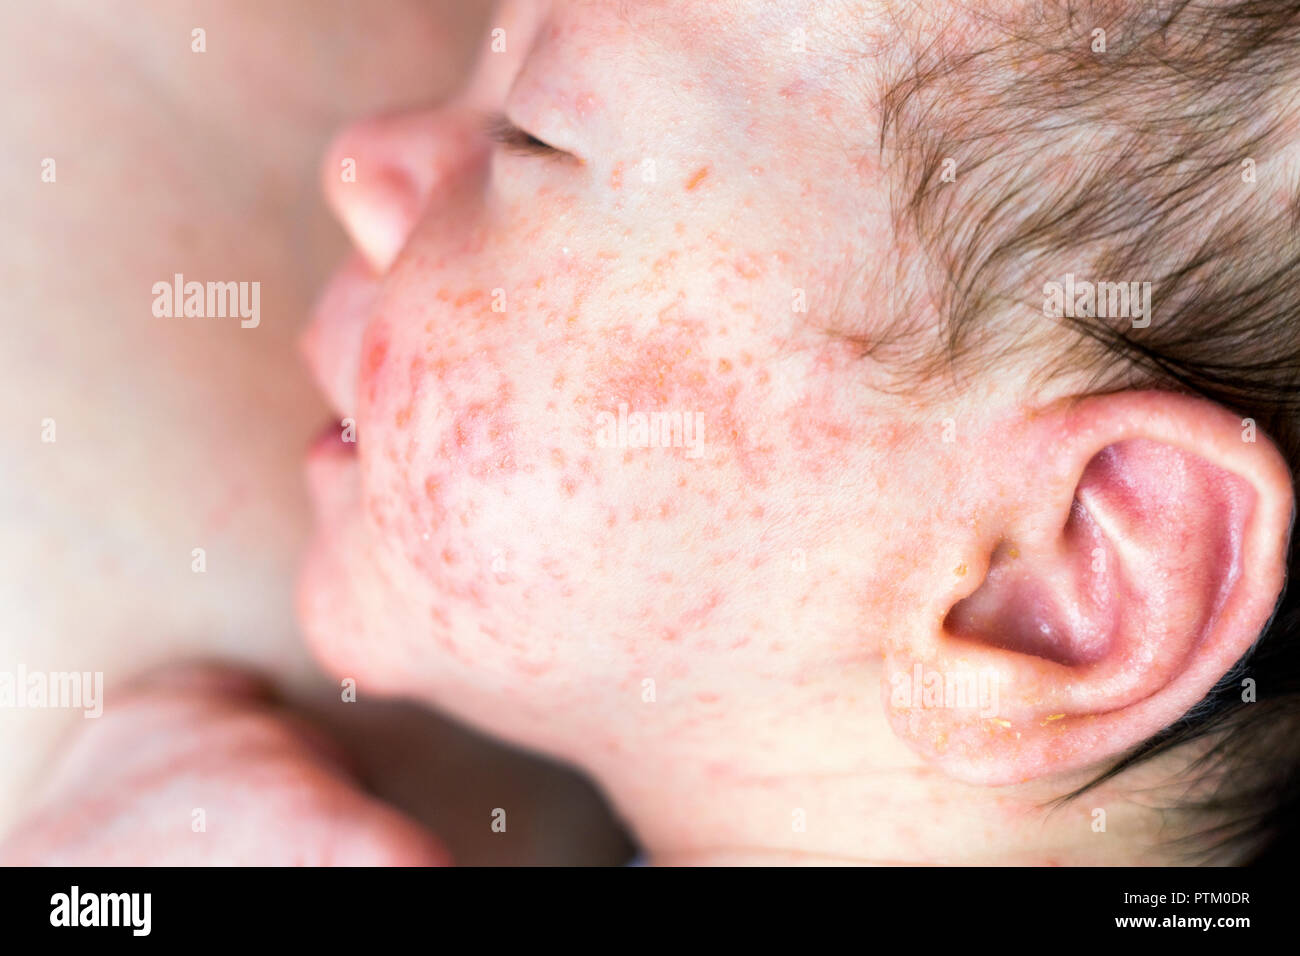 Newborn baby with many red spots caused by neurodermatitis, Poland Stock Photo